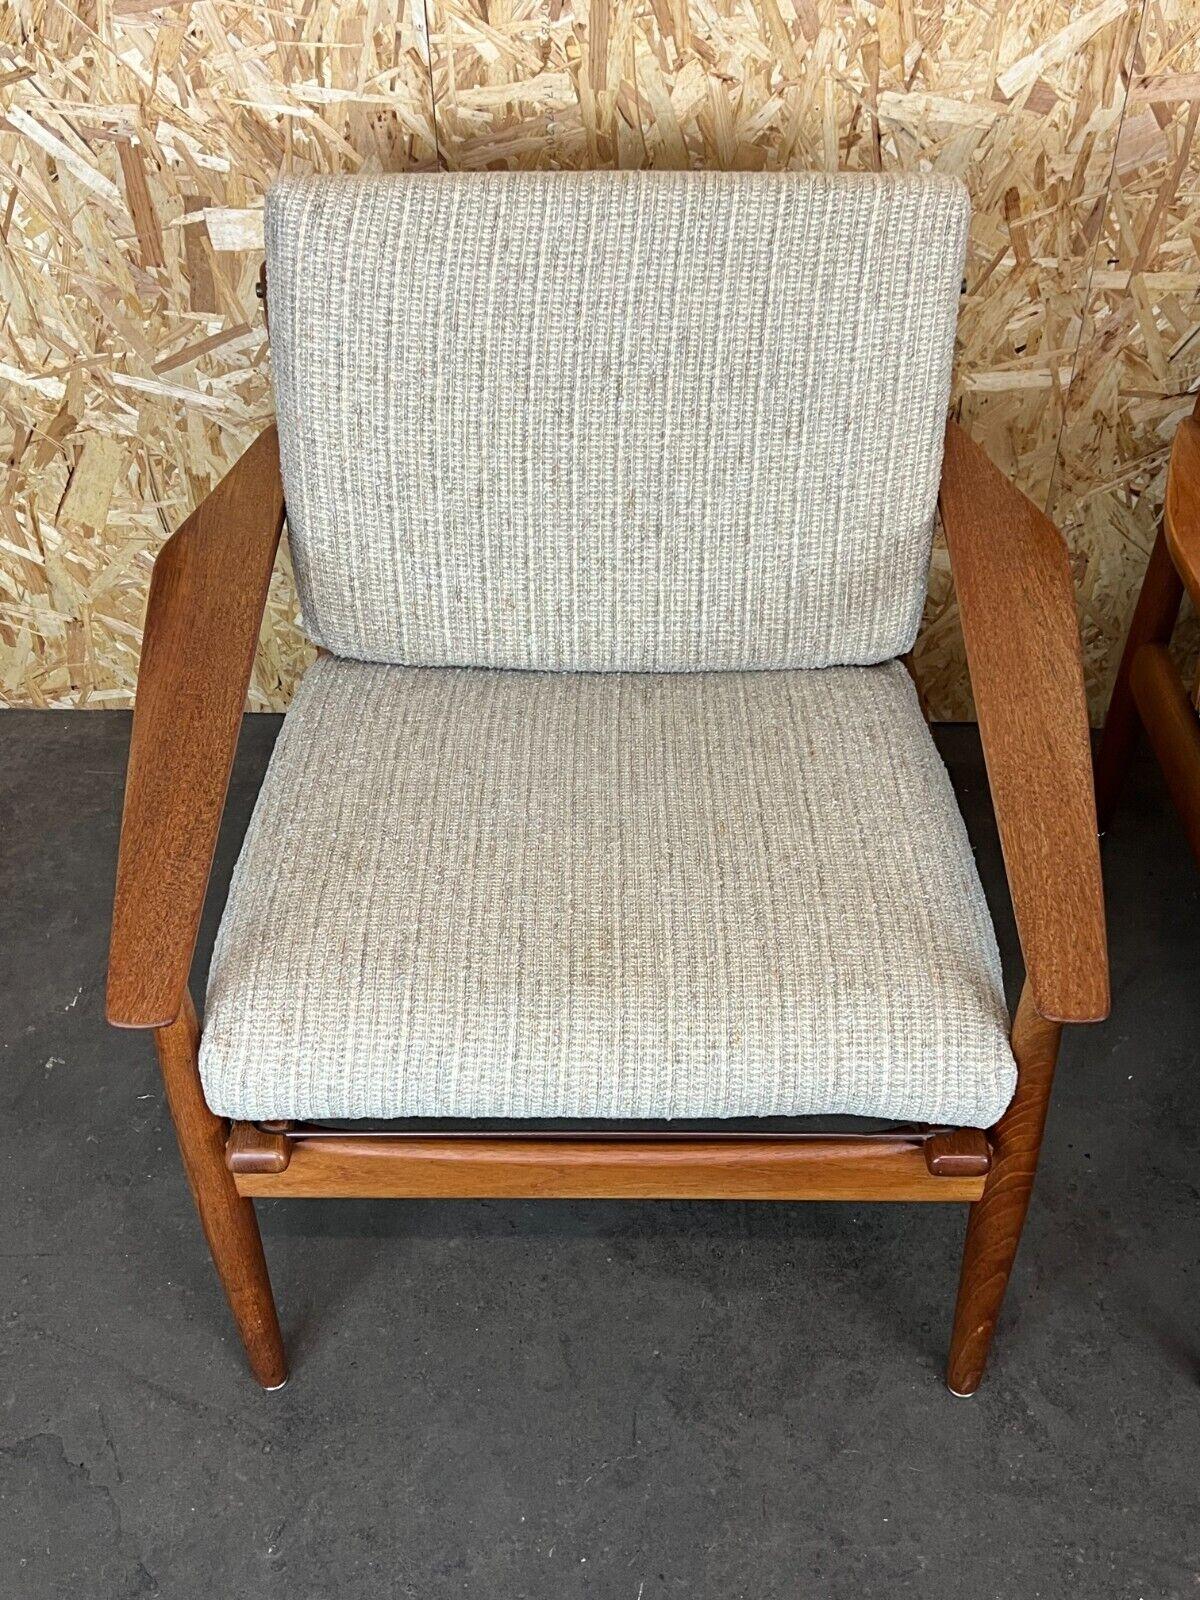 Late 20th Century 2x 60s 70s Teak Easy Chair Svend Aage Eriksen for Glostrup Design For Sale